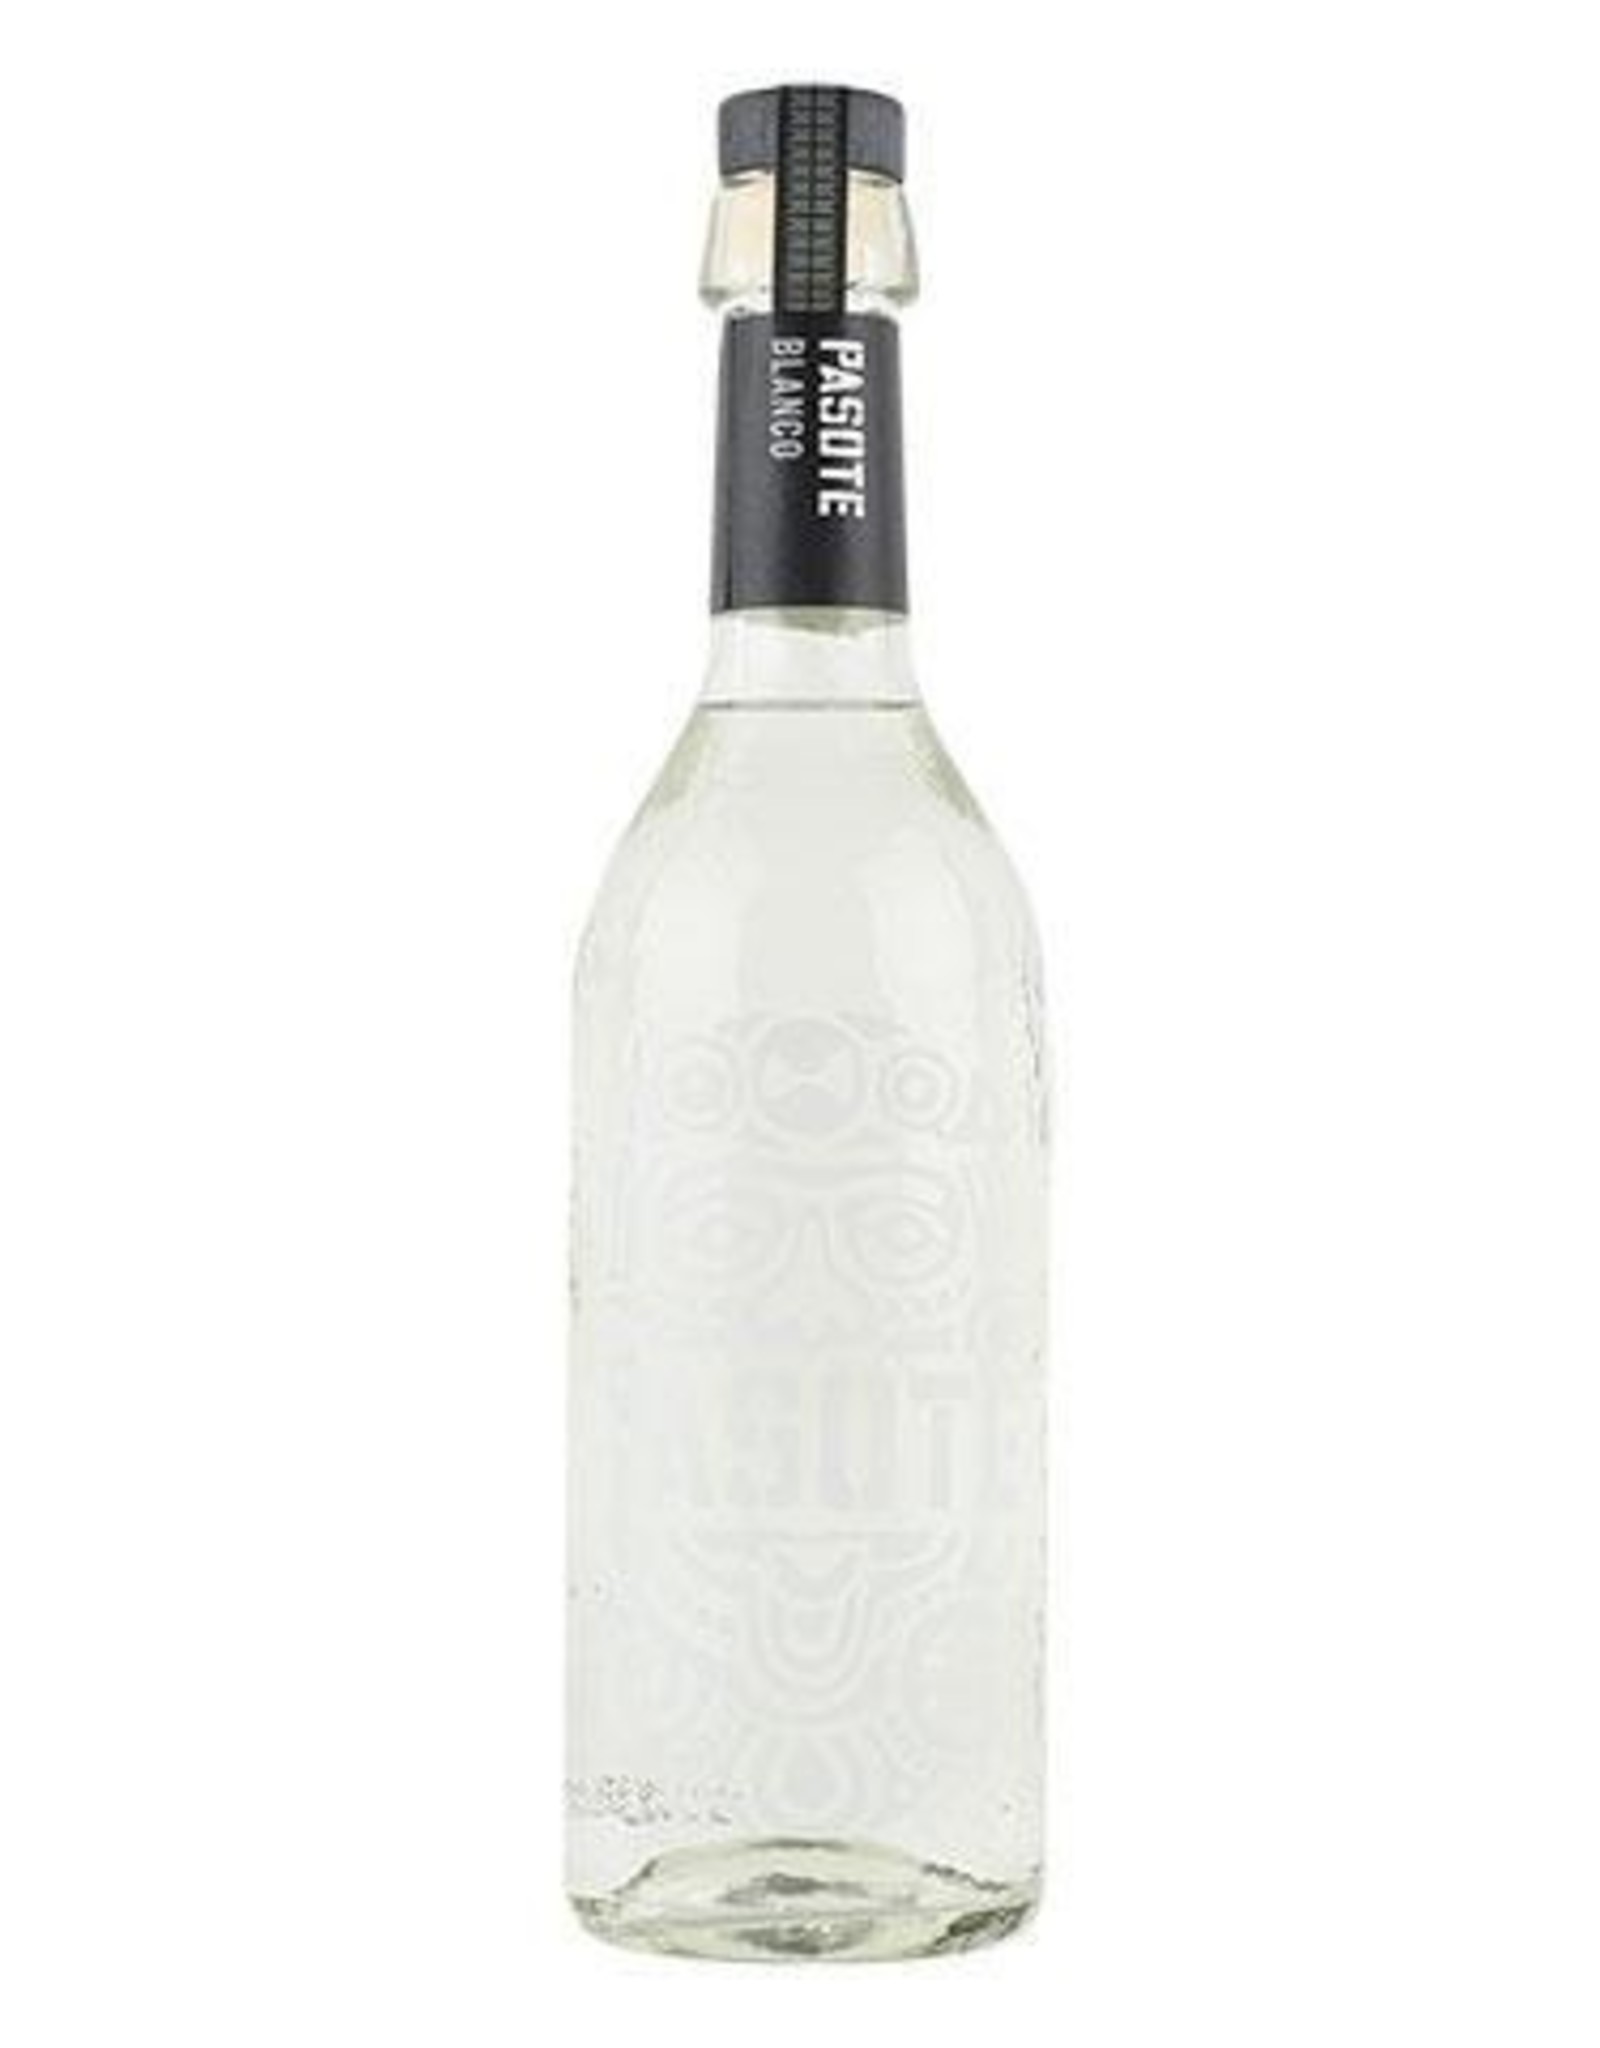 Pasote Pasote Blanco Tequila 750mL